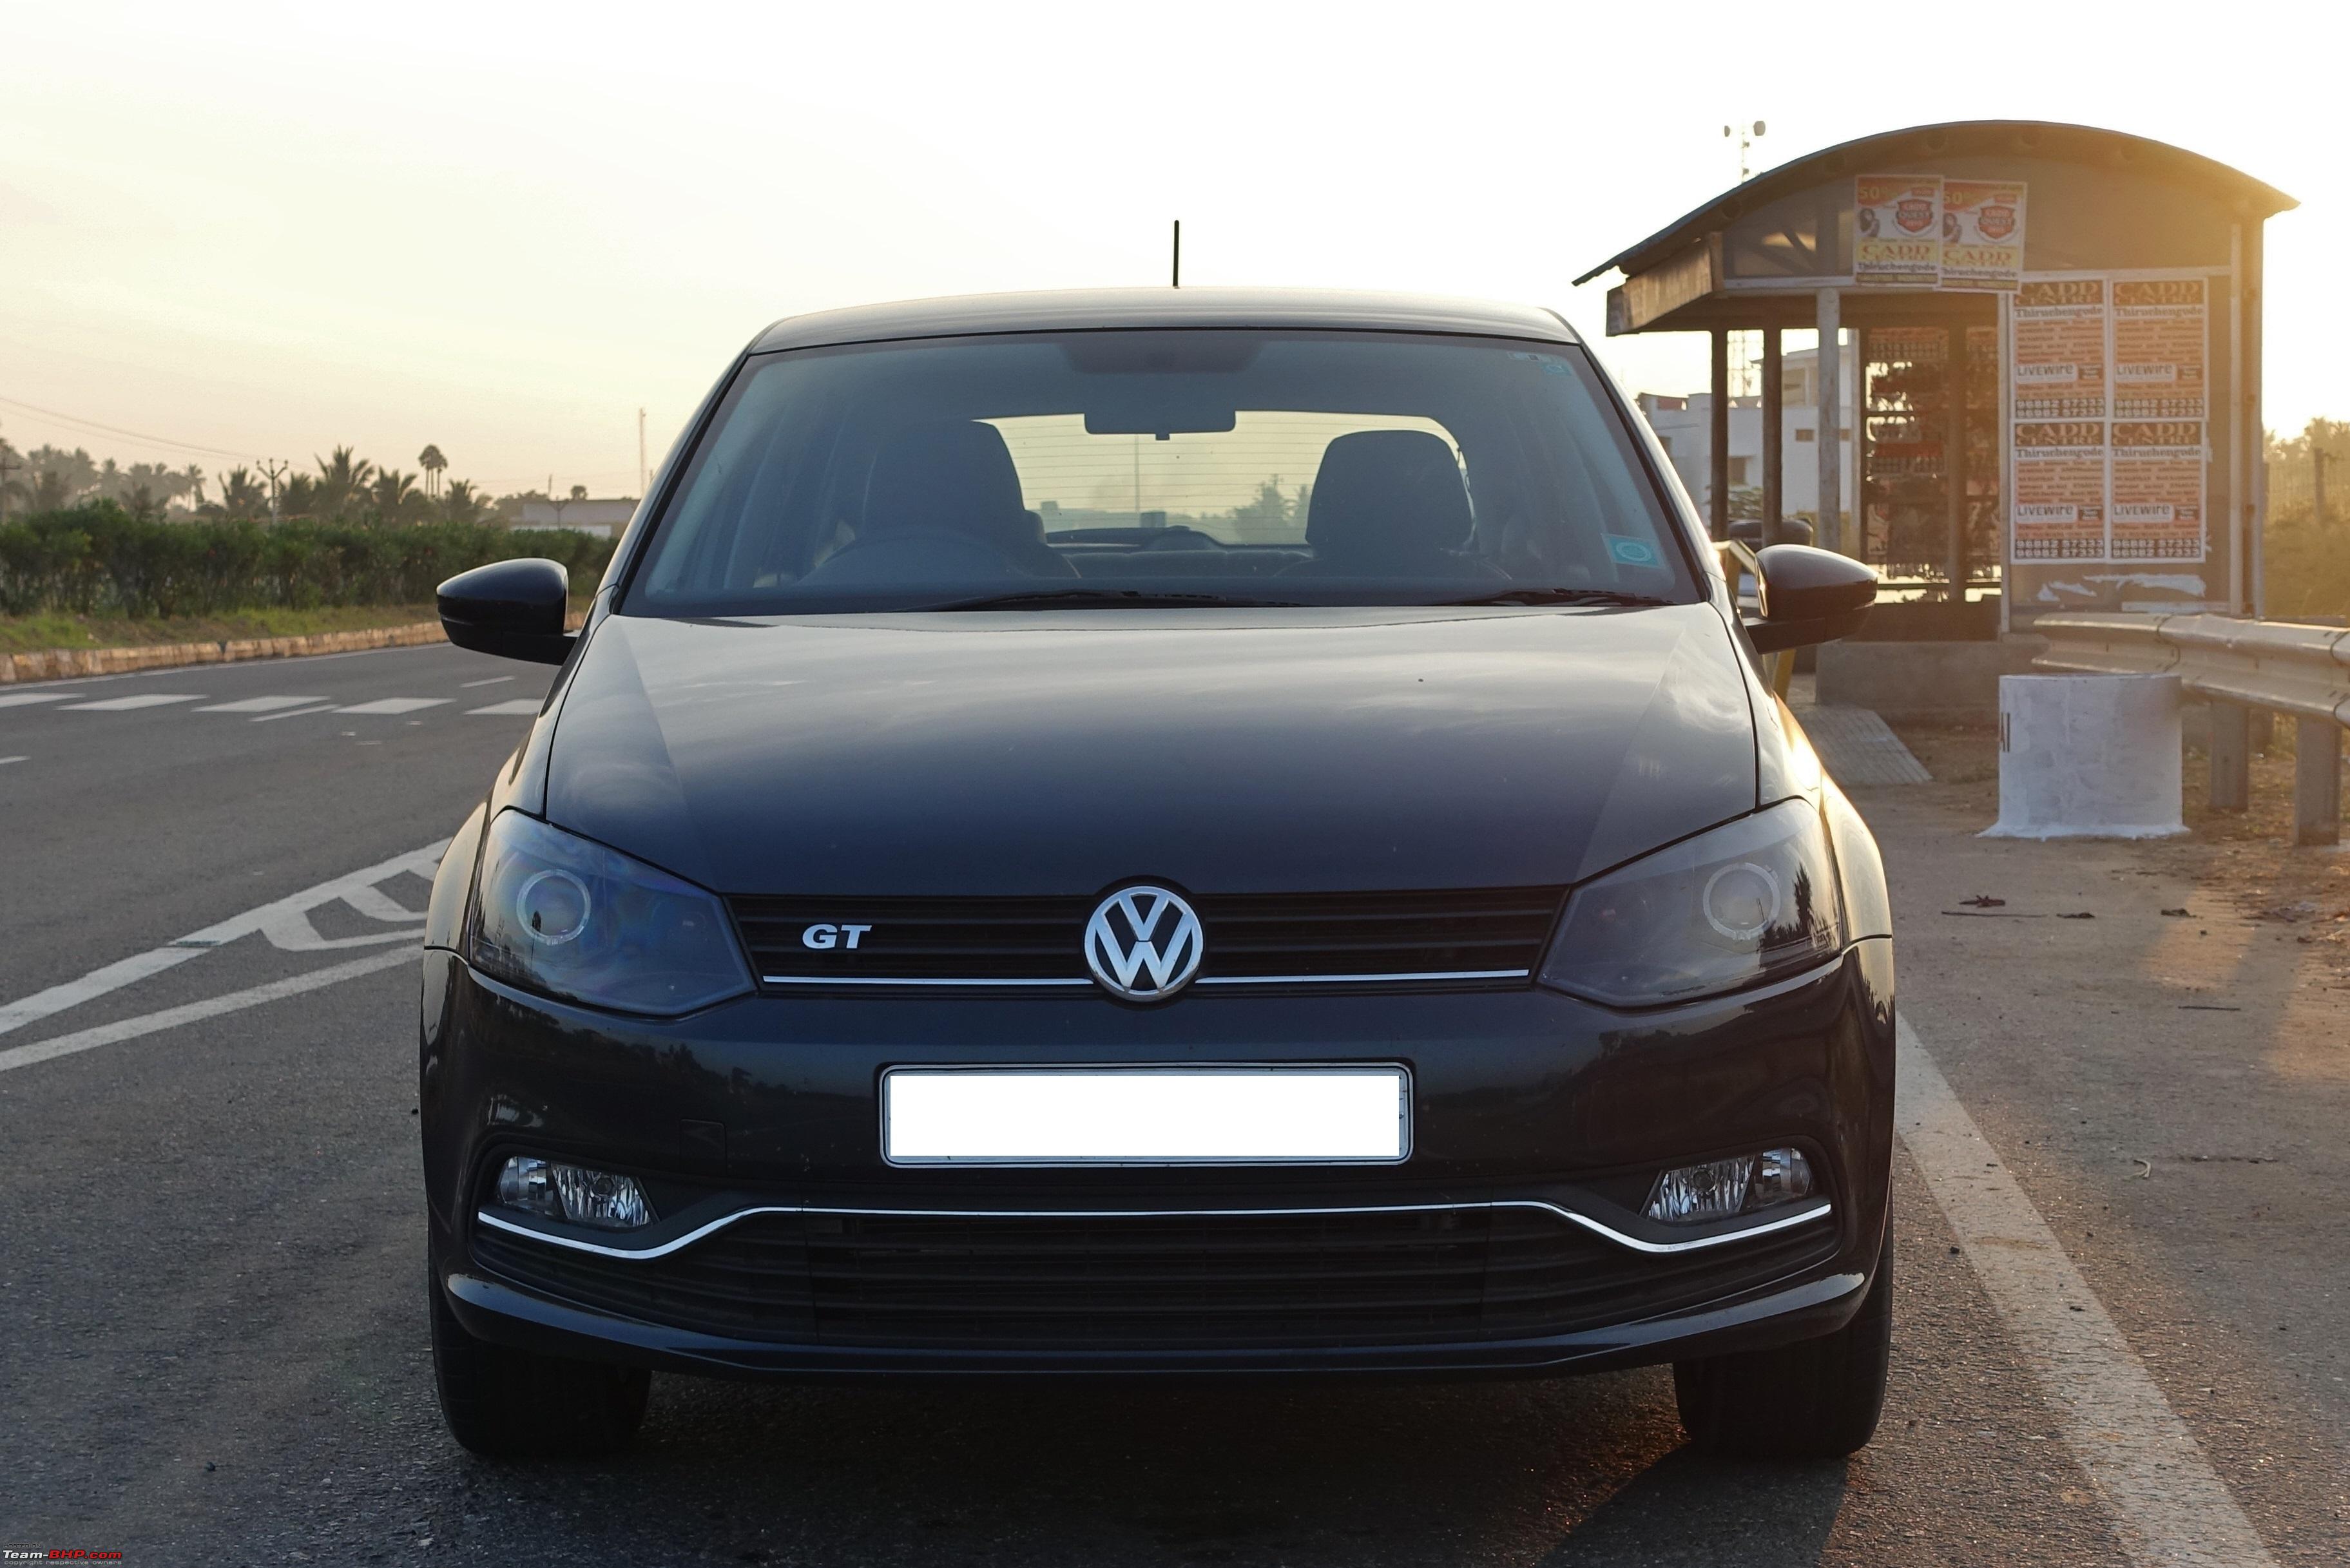 Volkswagen Polo 1.2L GT TSI : Official Review - Page 241 - Team-BHP